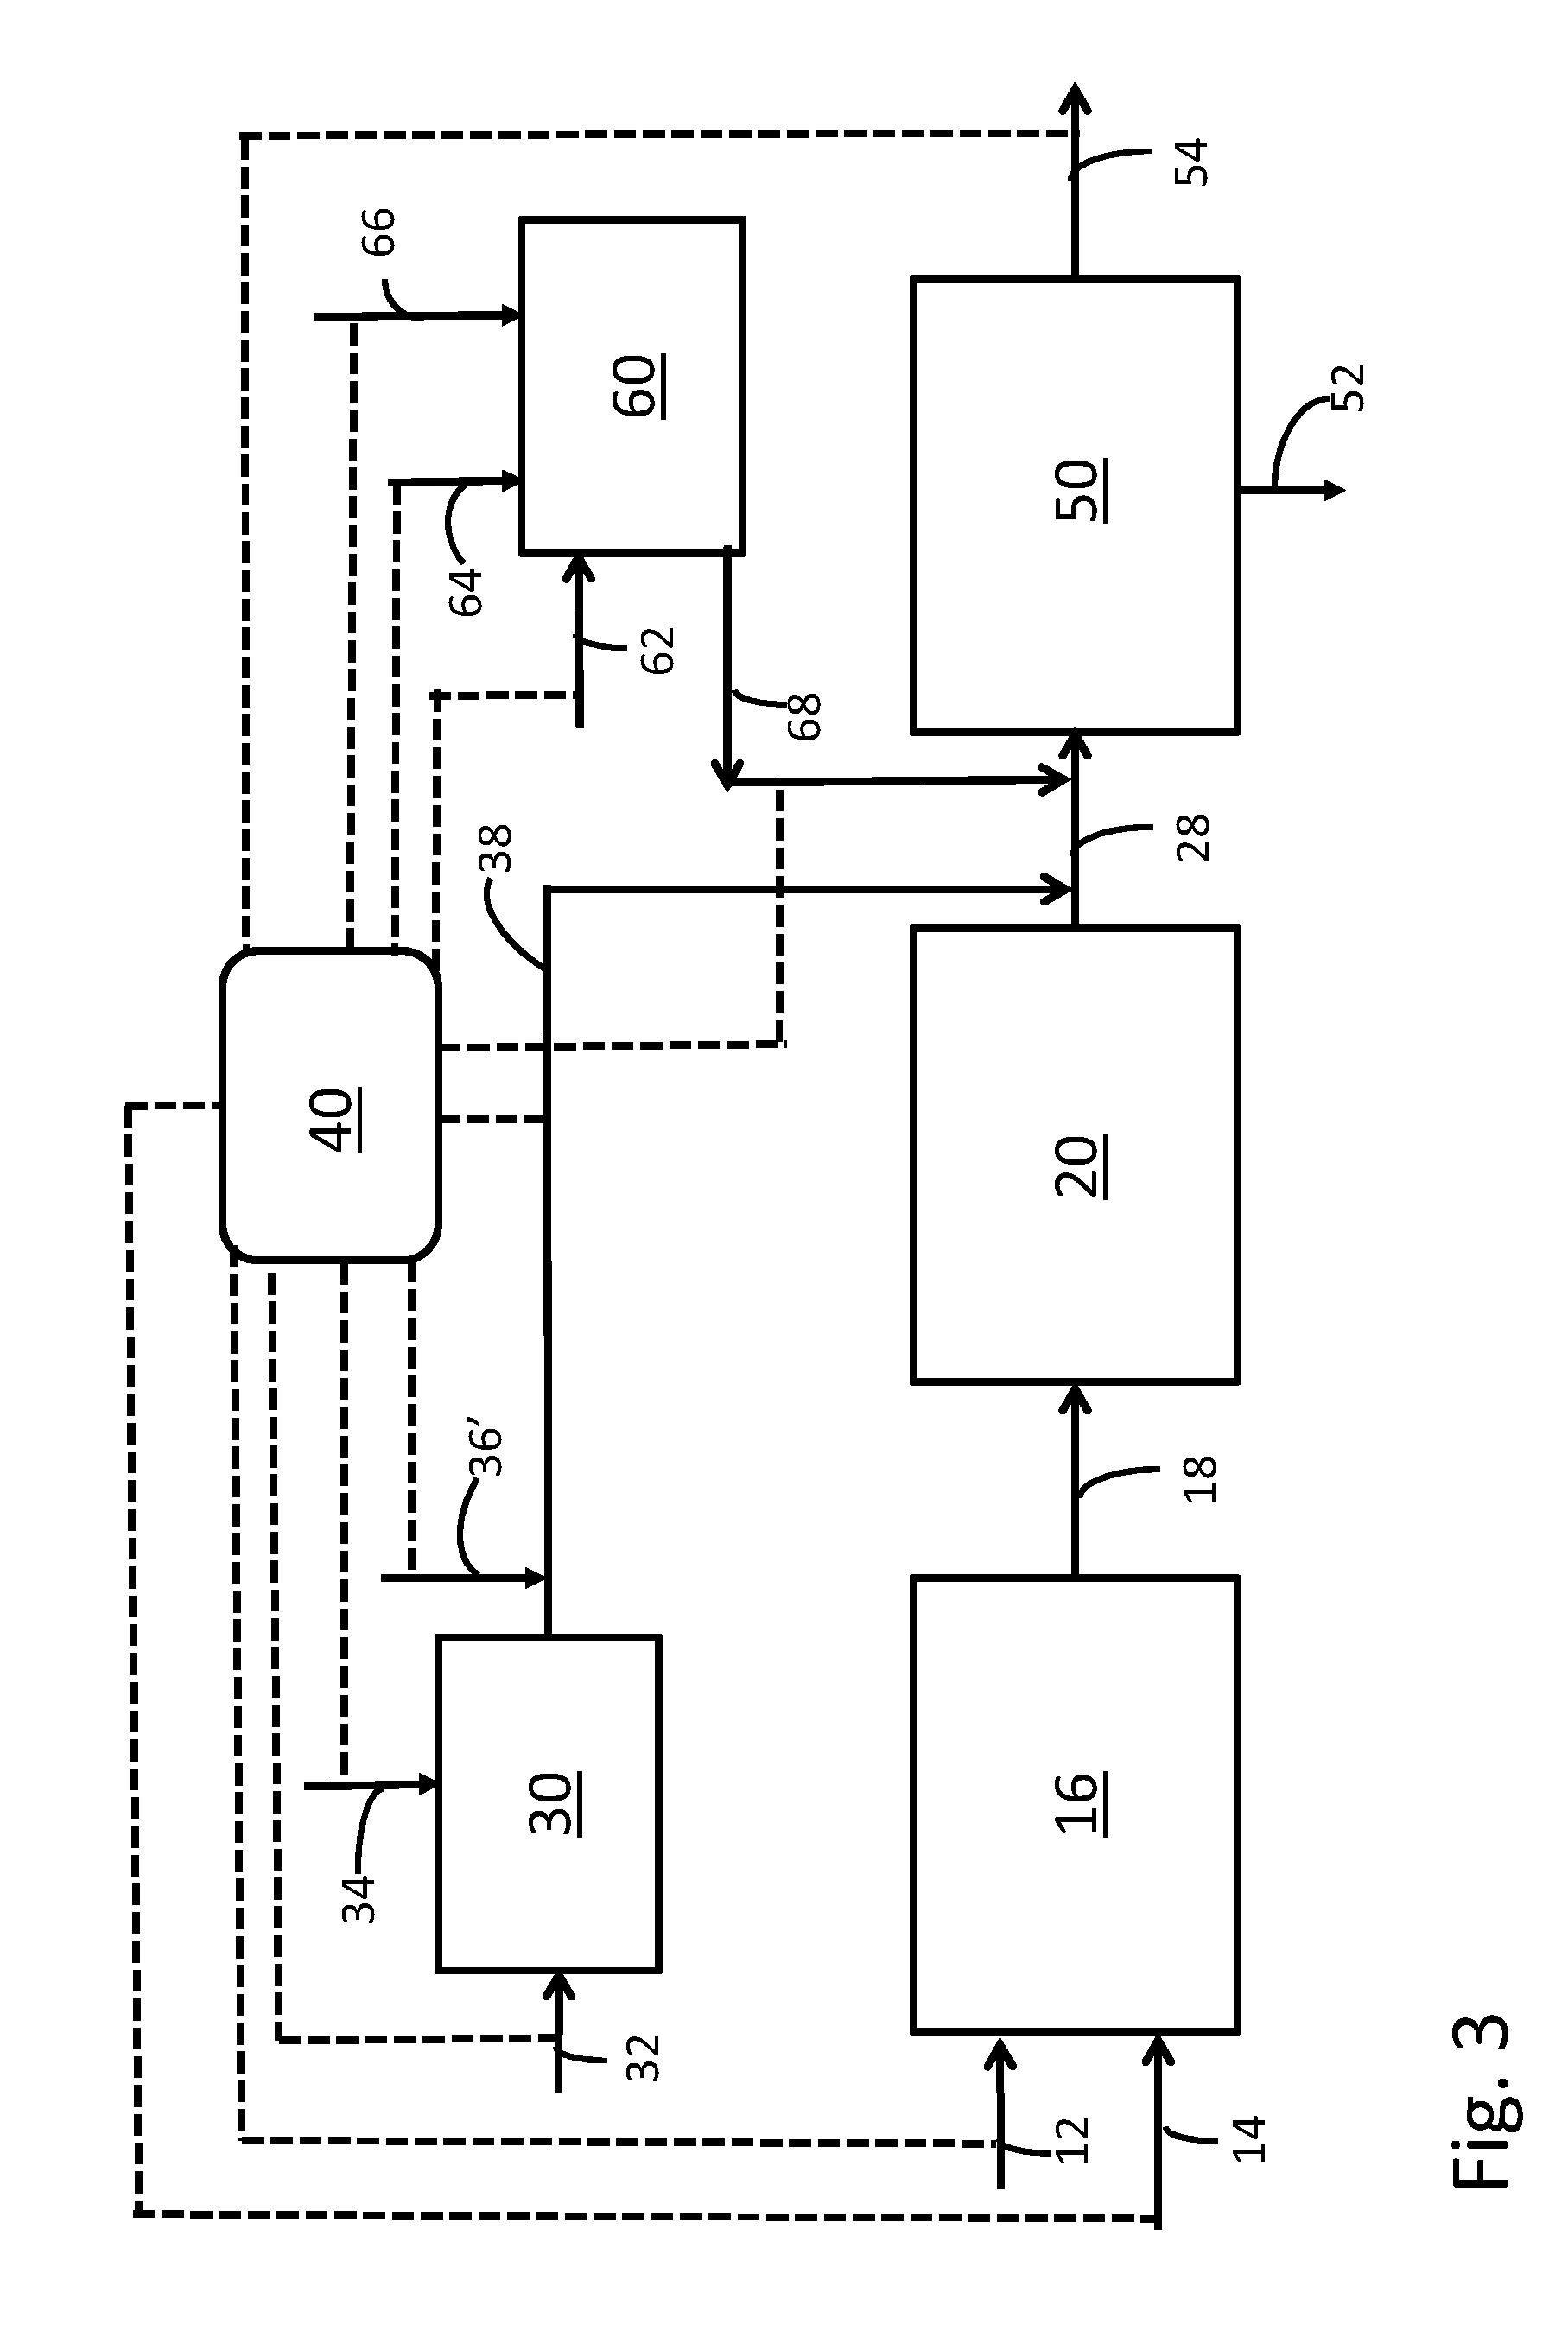 Dry Processes, Apparatus Compositions and Systems for Reducing Mercury, Sulfur Oxides and HCl